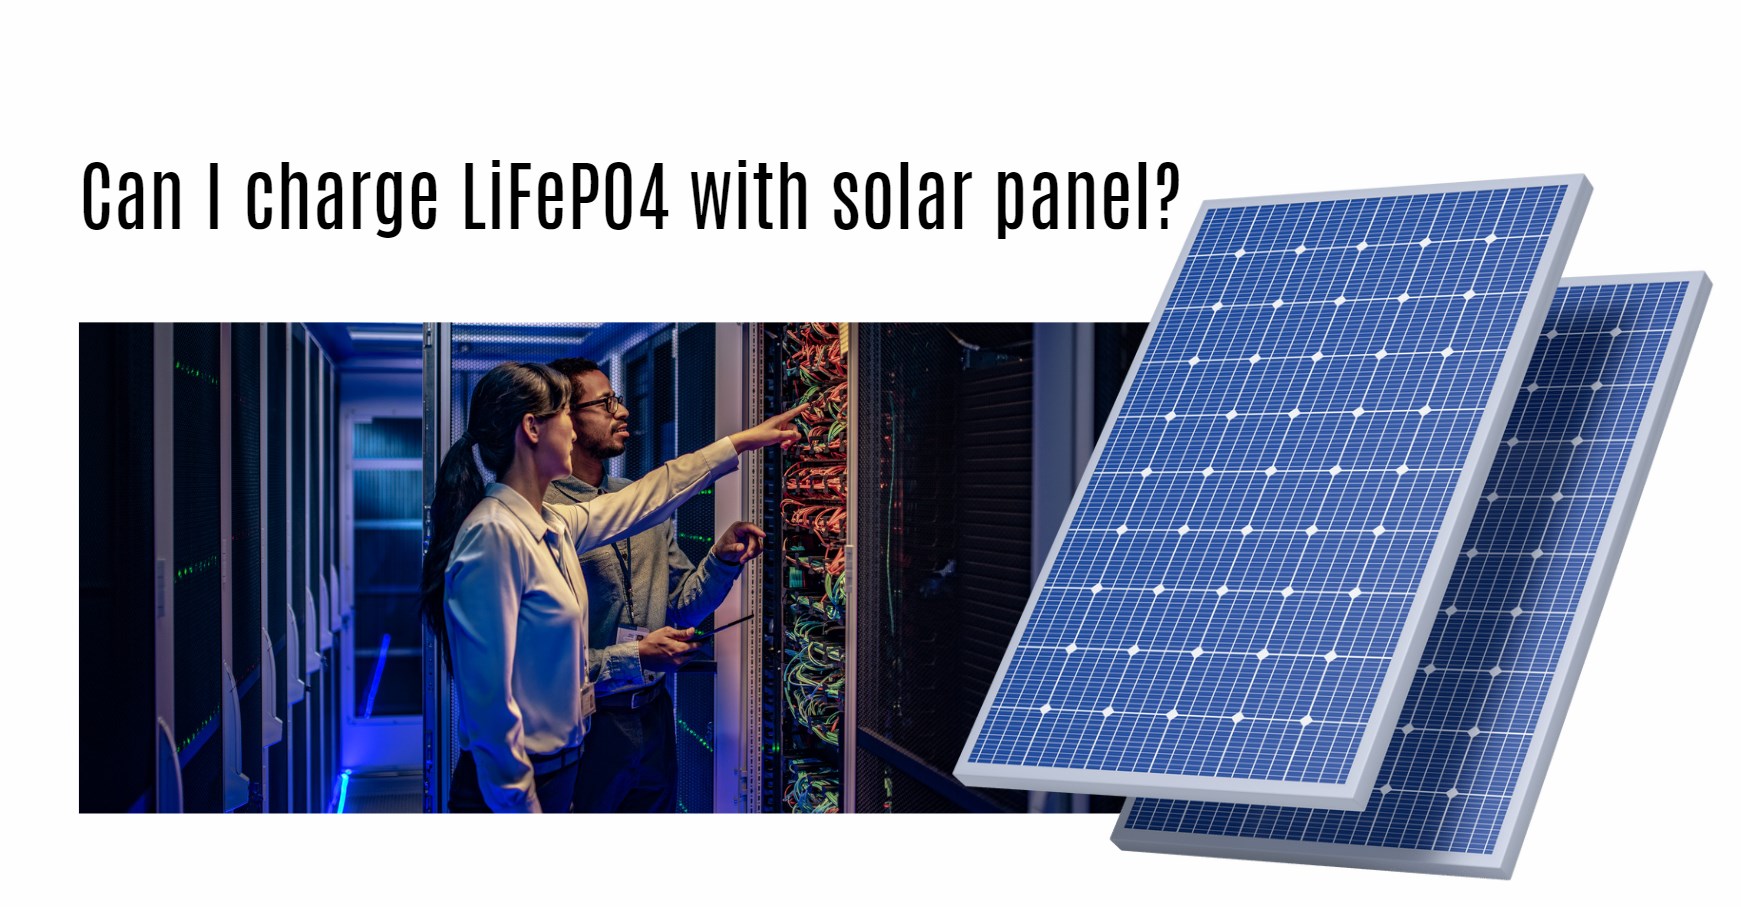 Can I charge LiFePO4 with solar panel?